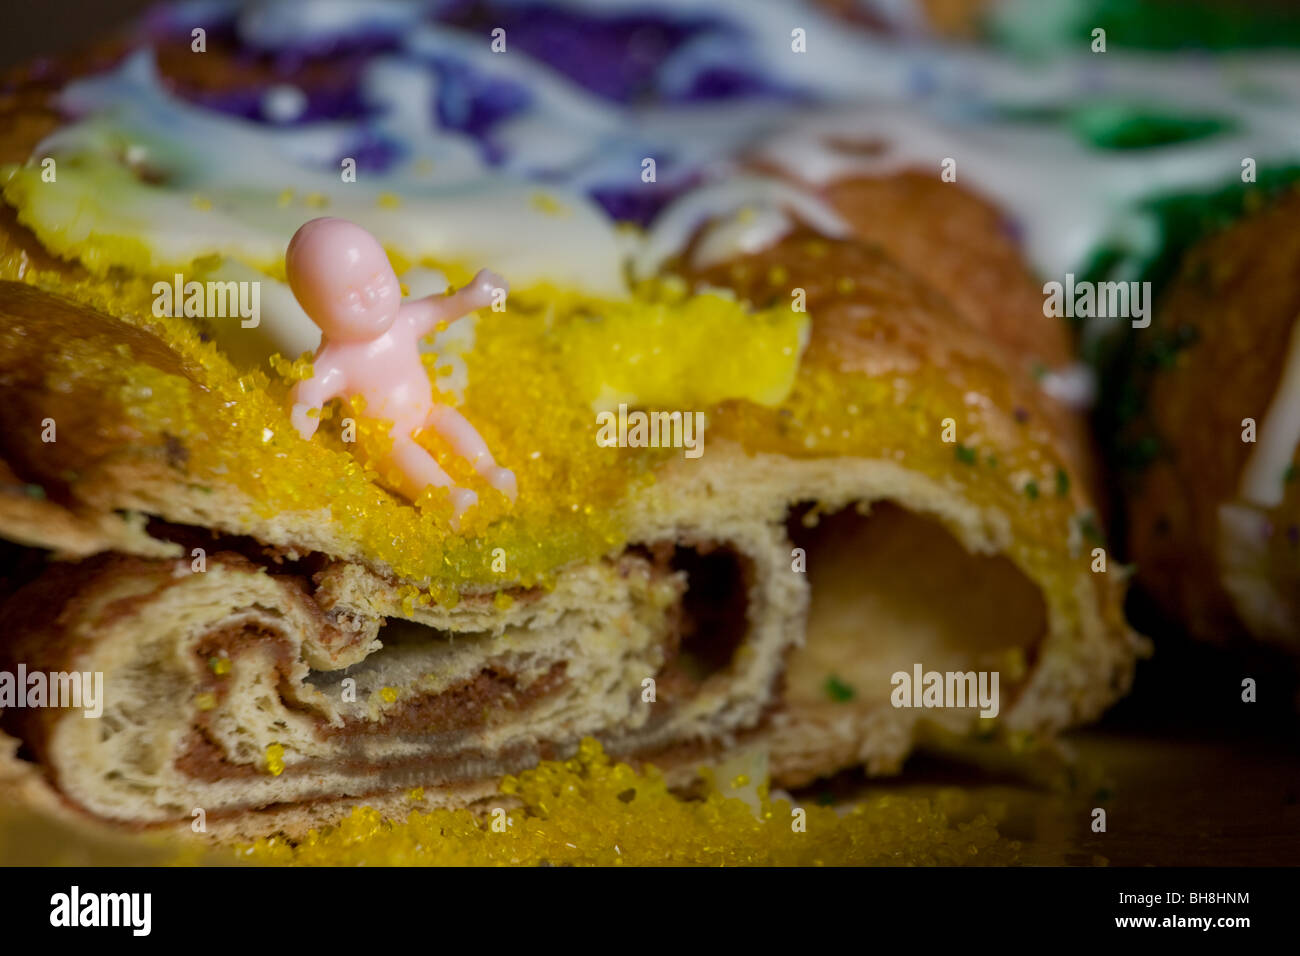 Mardi gras tradition, King cake contains a plastic baby toy which brings good luck. New Orleans, Louisiana Stock Photo